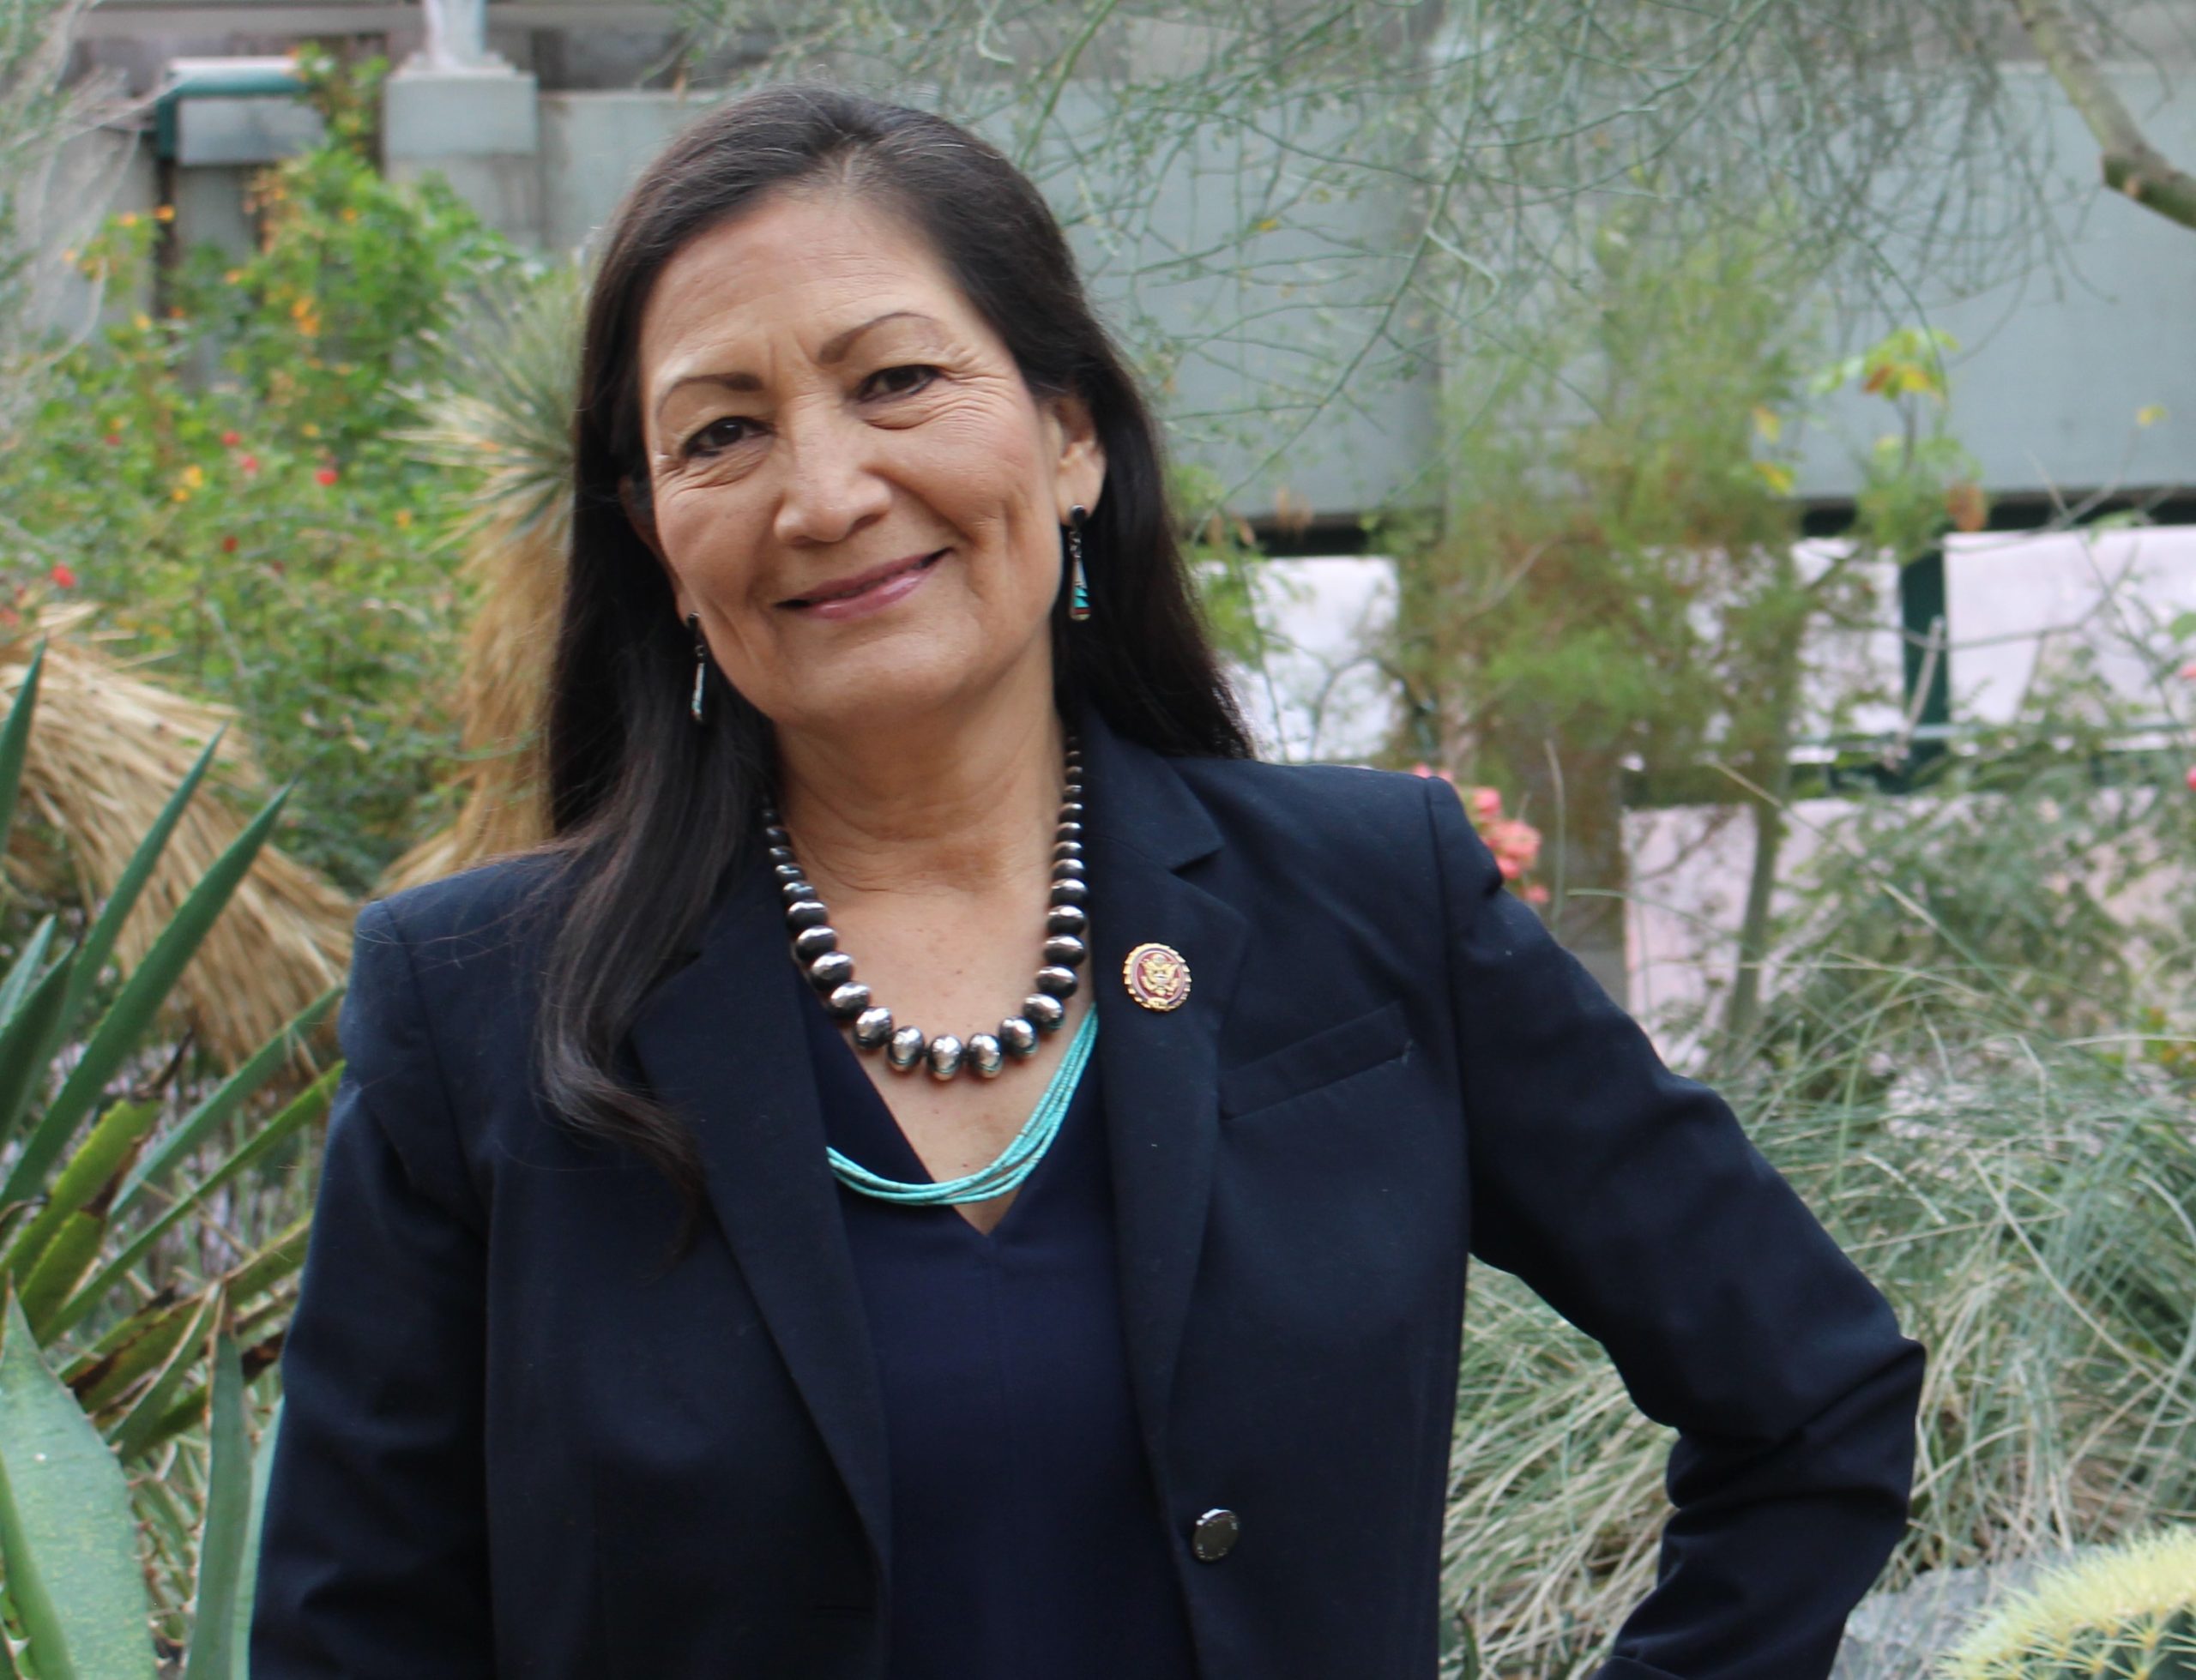 For Haaland, climate change is ‘worth losing sleep over’